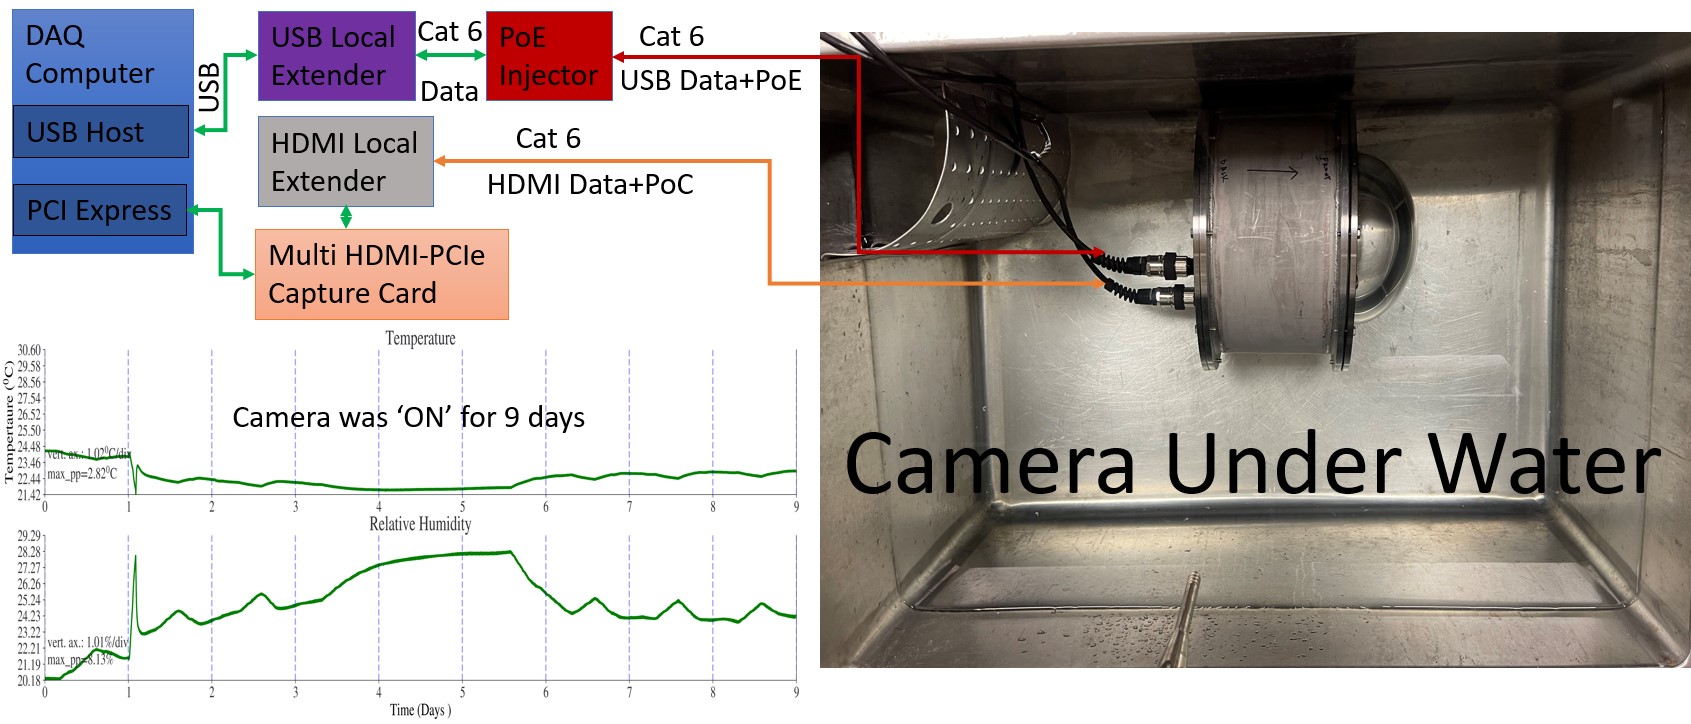 Fig. 2: Underwater Camera Connection